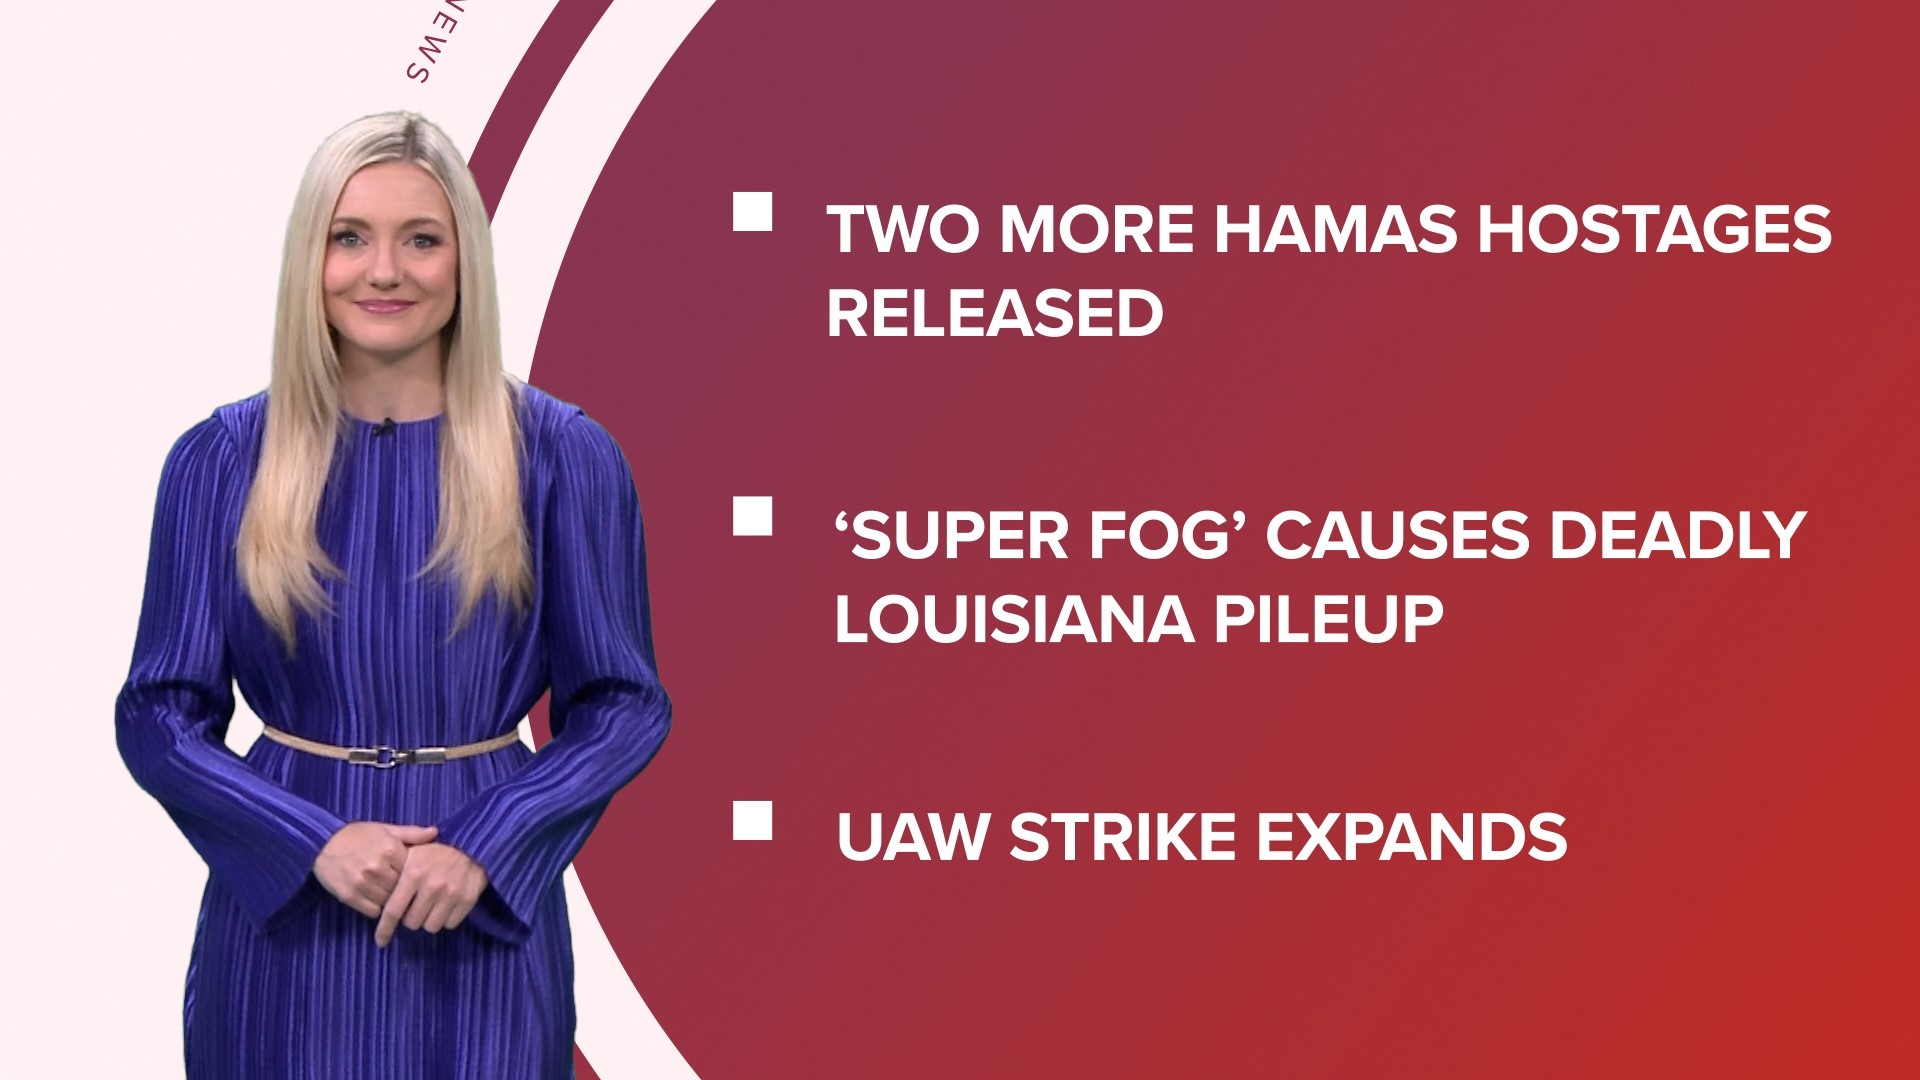 A look at what is happening in the news from two more Israeli hostages released from Hamas to a deadly pileup in Louisiana and the UAW strike expands.